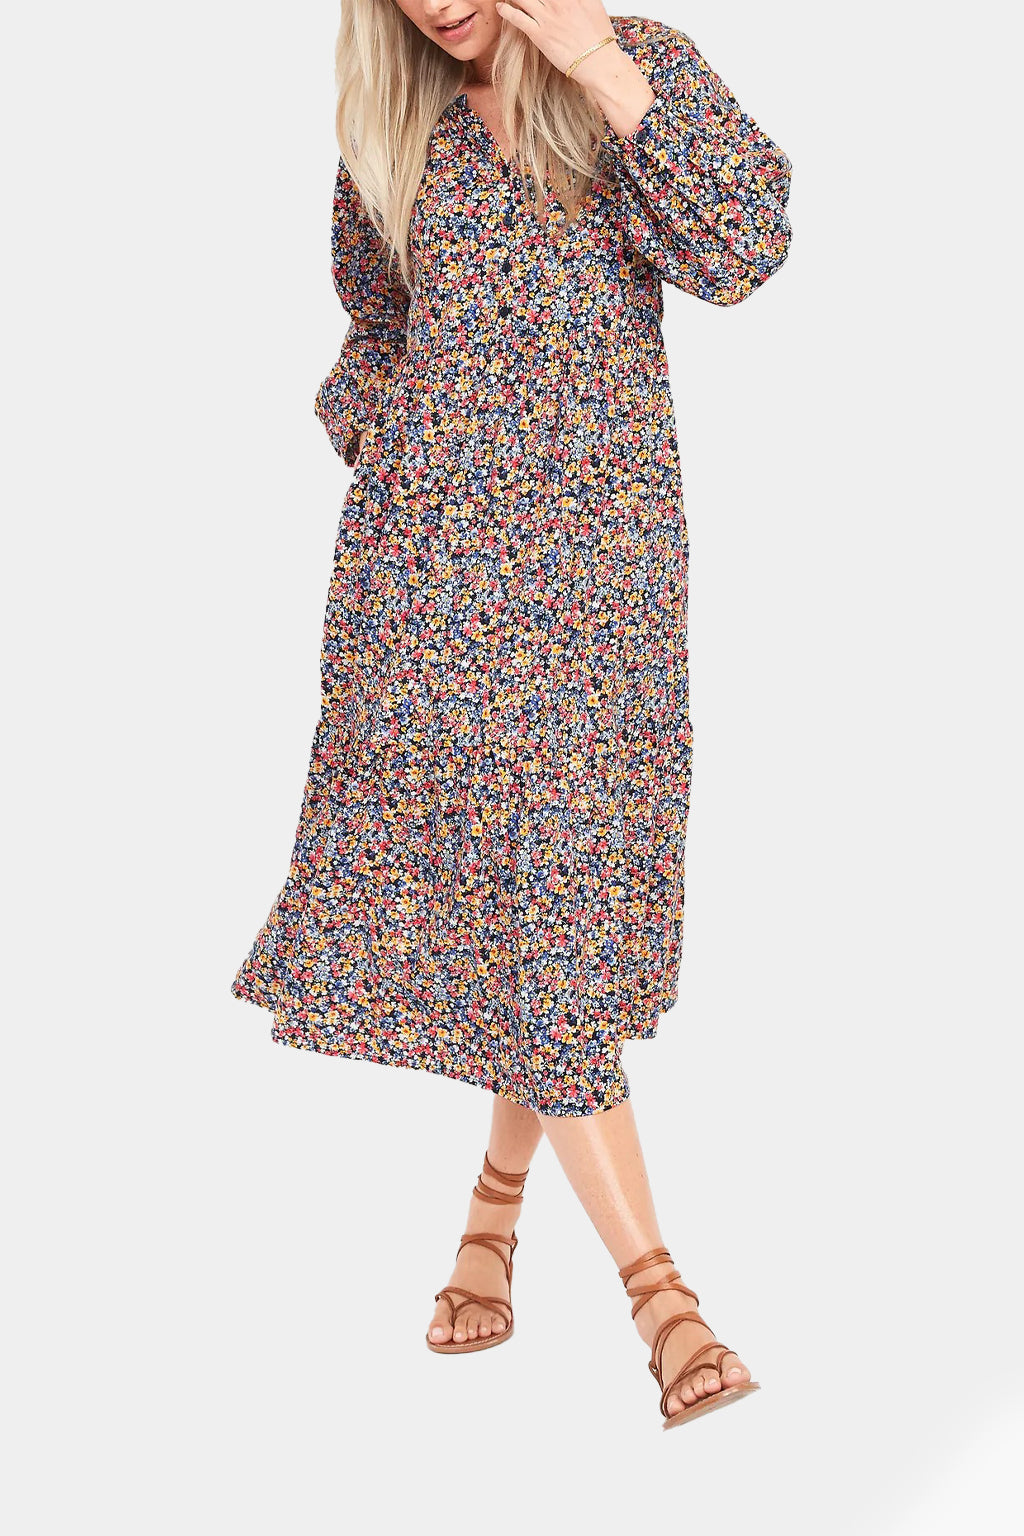 Old Navy - Printed Button-Front All-Day Midi Swing Dress